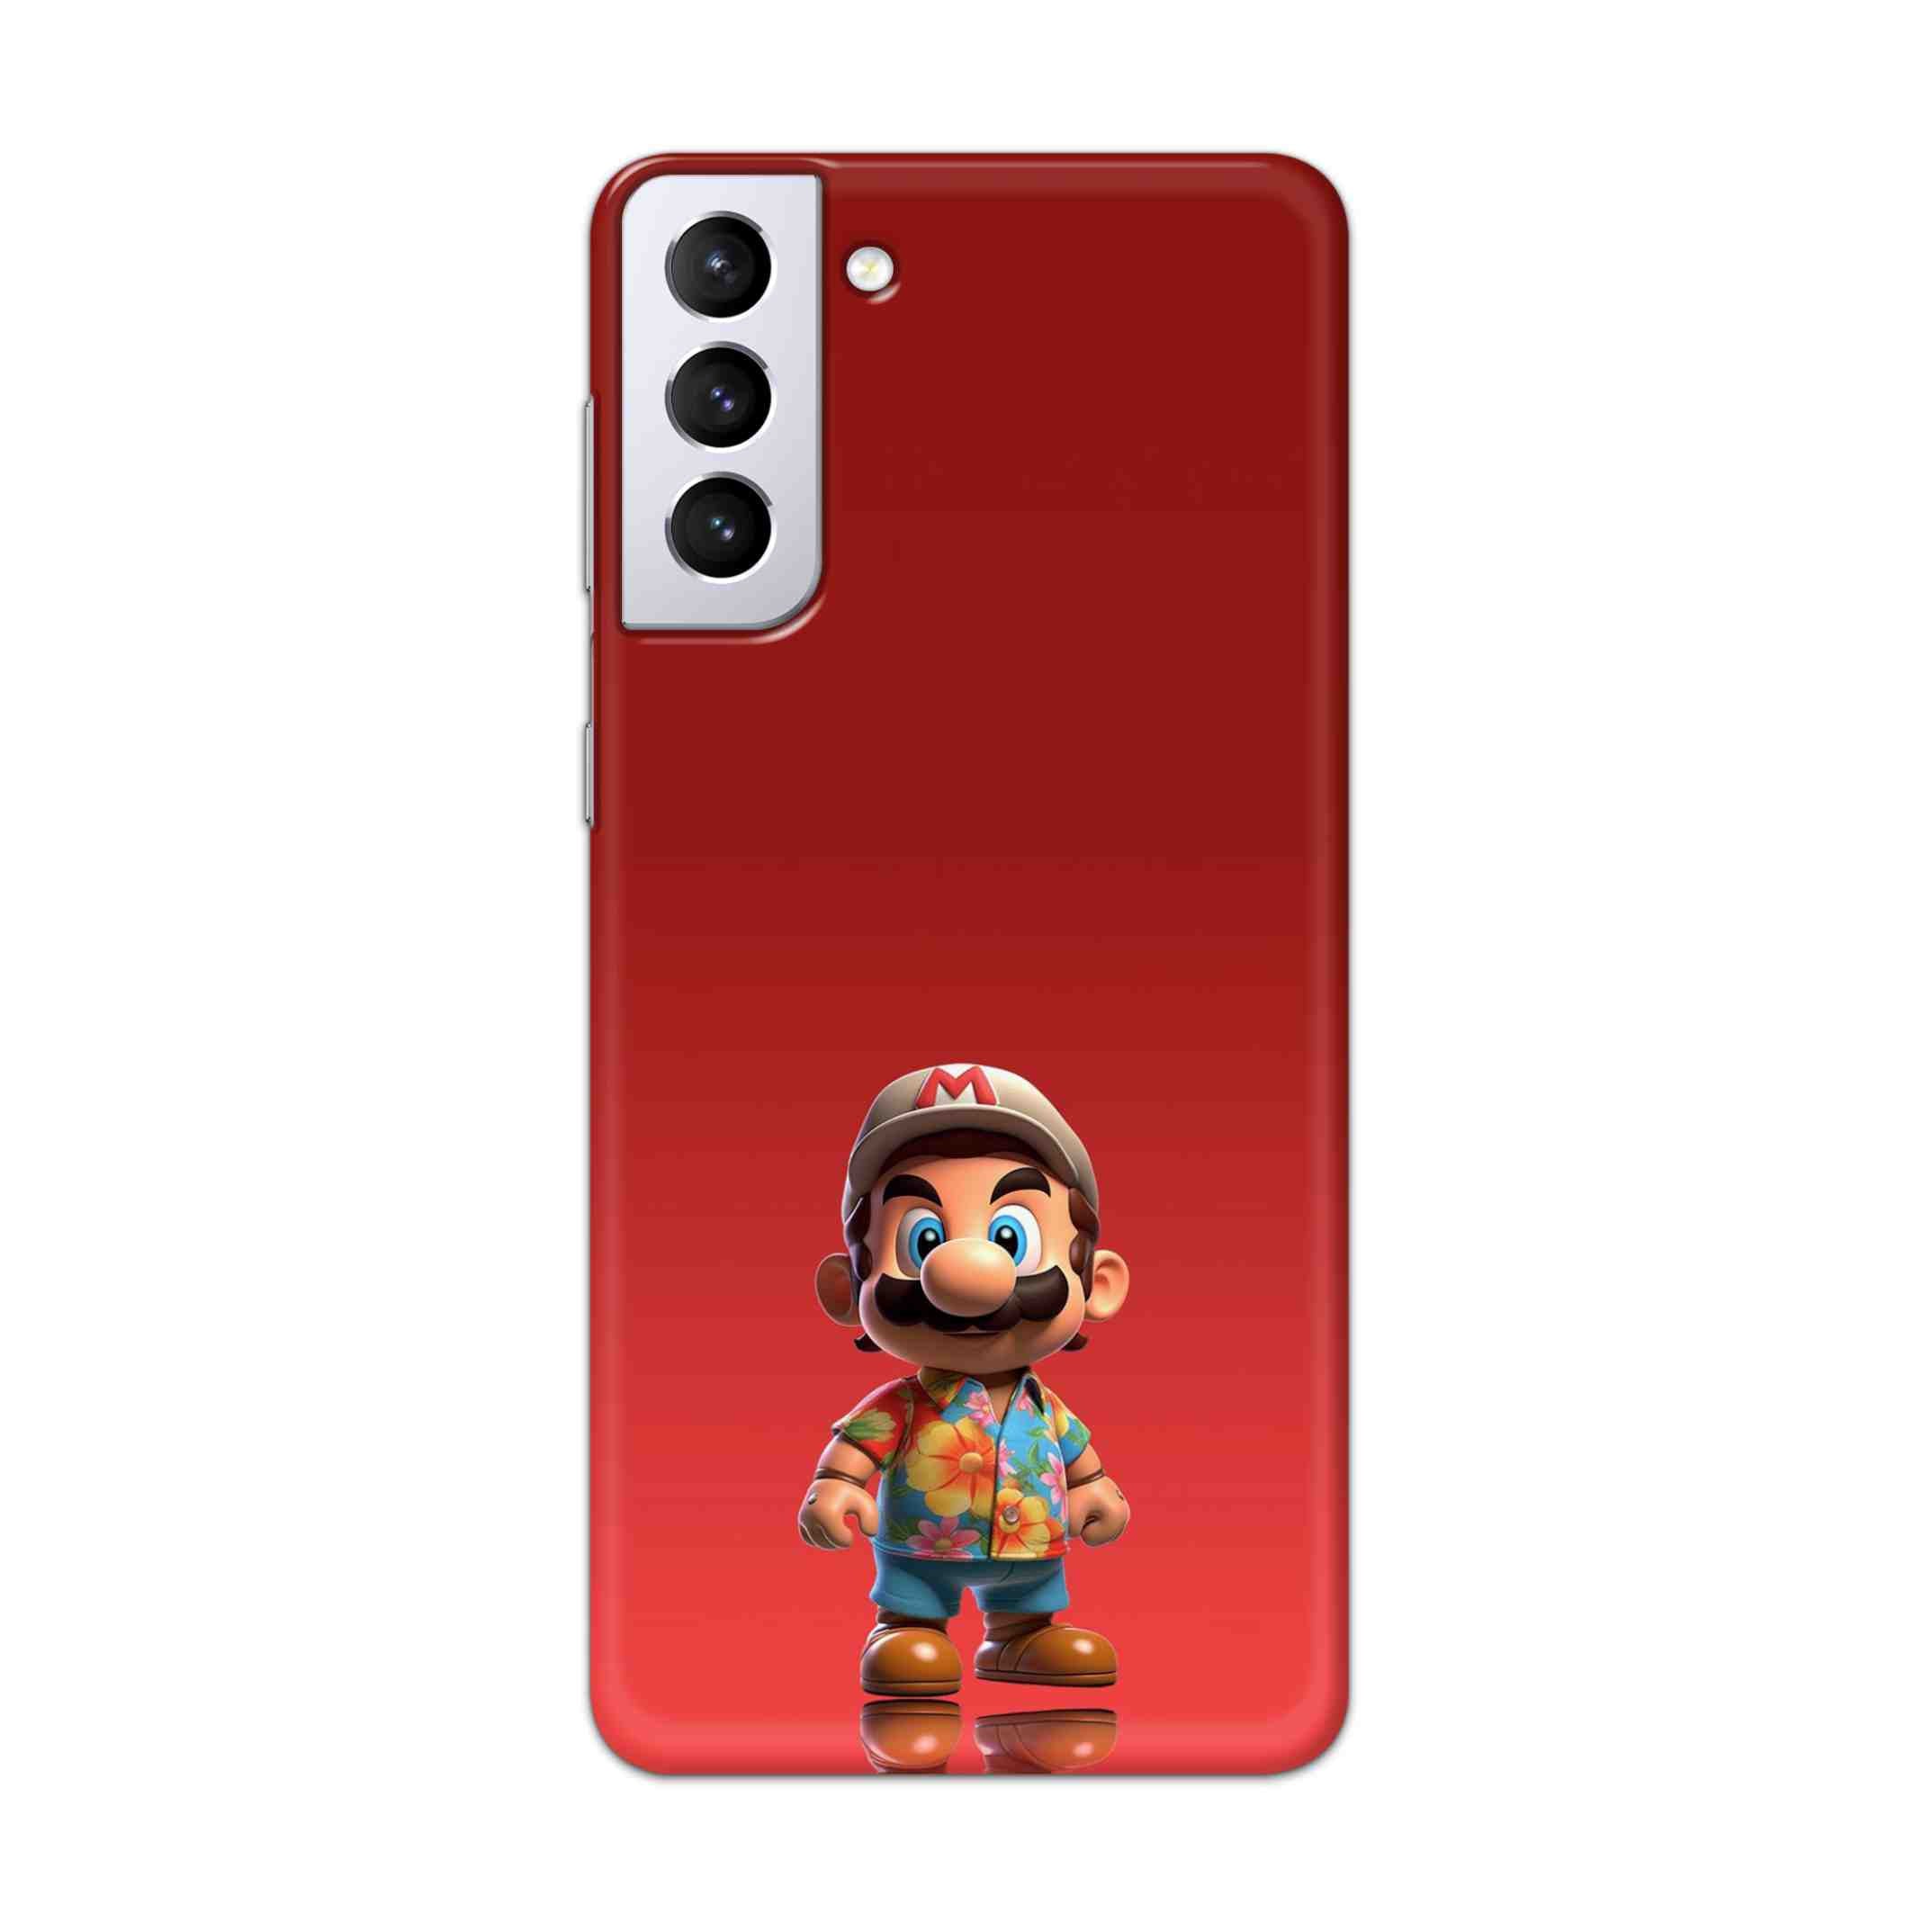 Buy Mario Hard Back Mobile Phone Case Cover For Samsung Galaxy S21 Plus Online